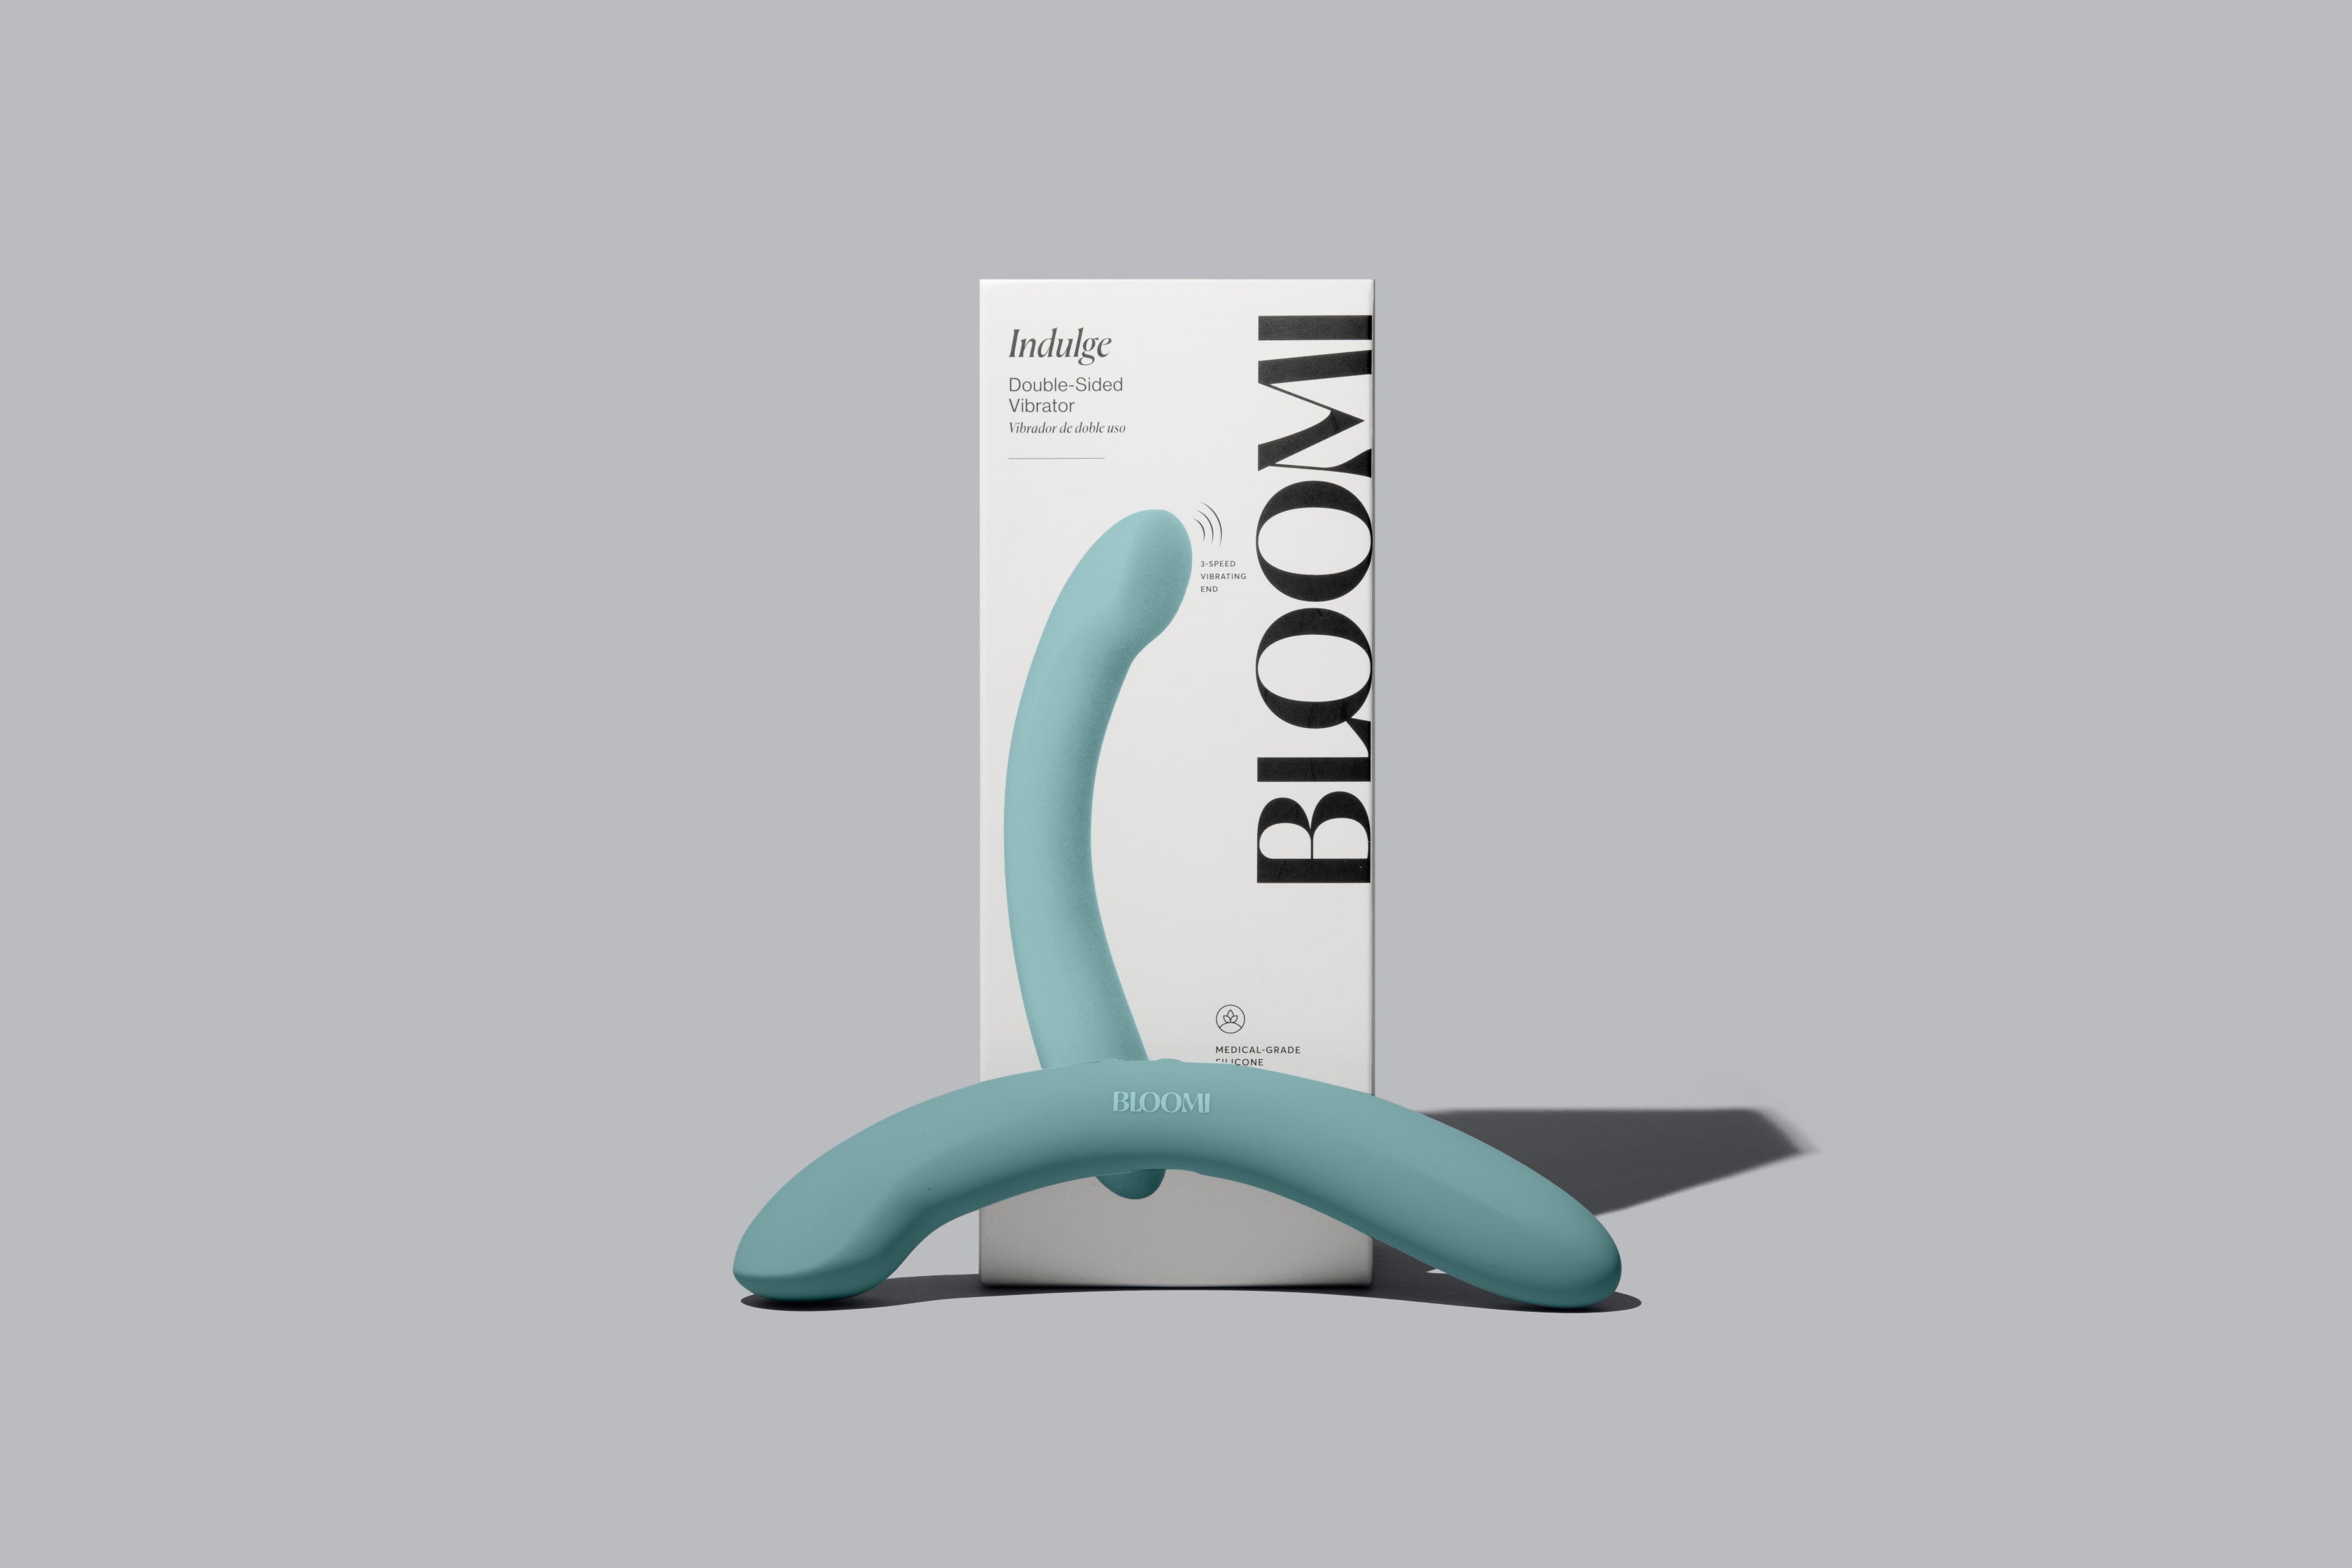 Waterproof adult sex toy from body-safe silicone on gift paper bag